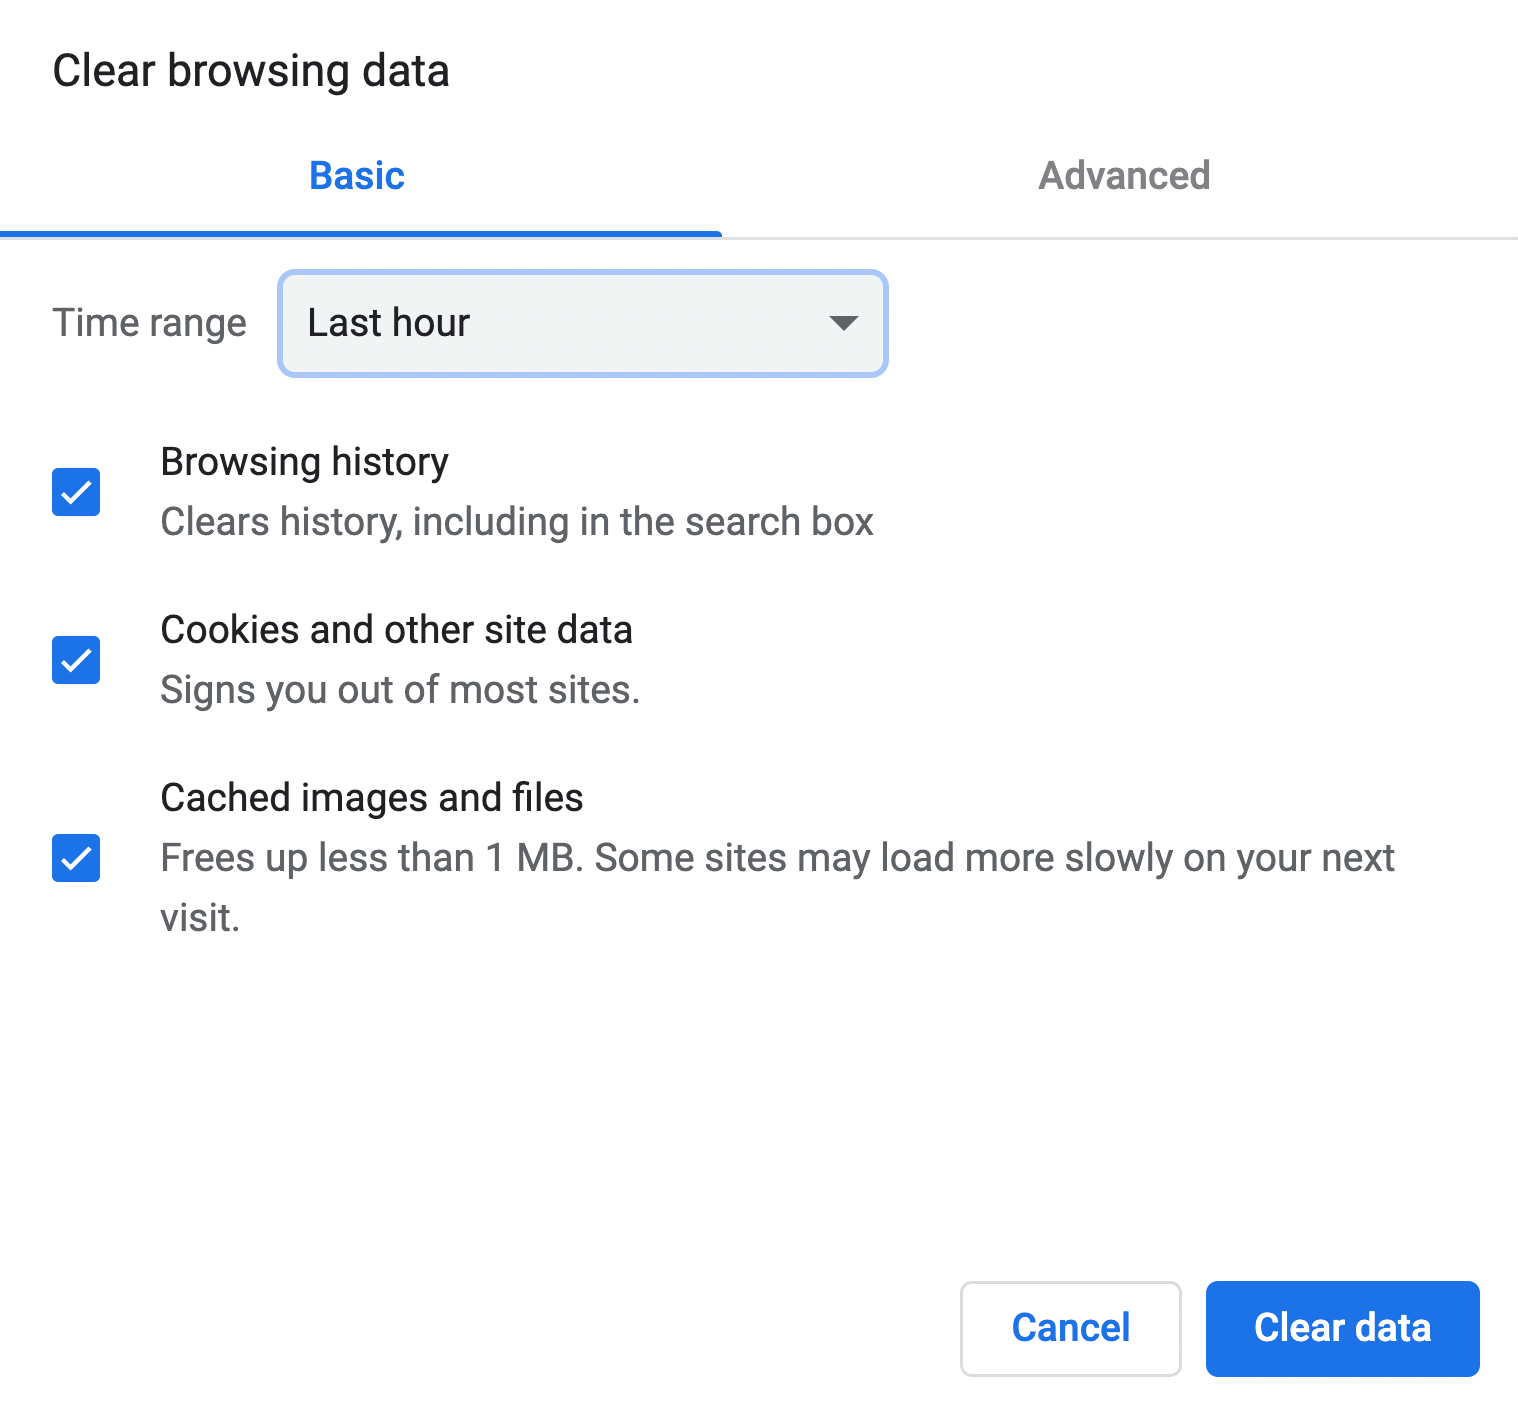 Clear browsing data in Chrome can resolve the ERR_CONNECTION_REFUSED error.